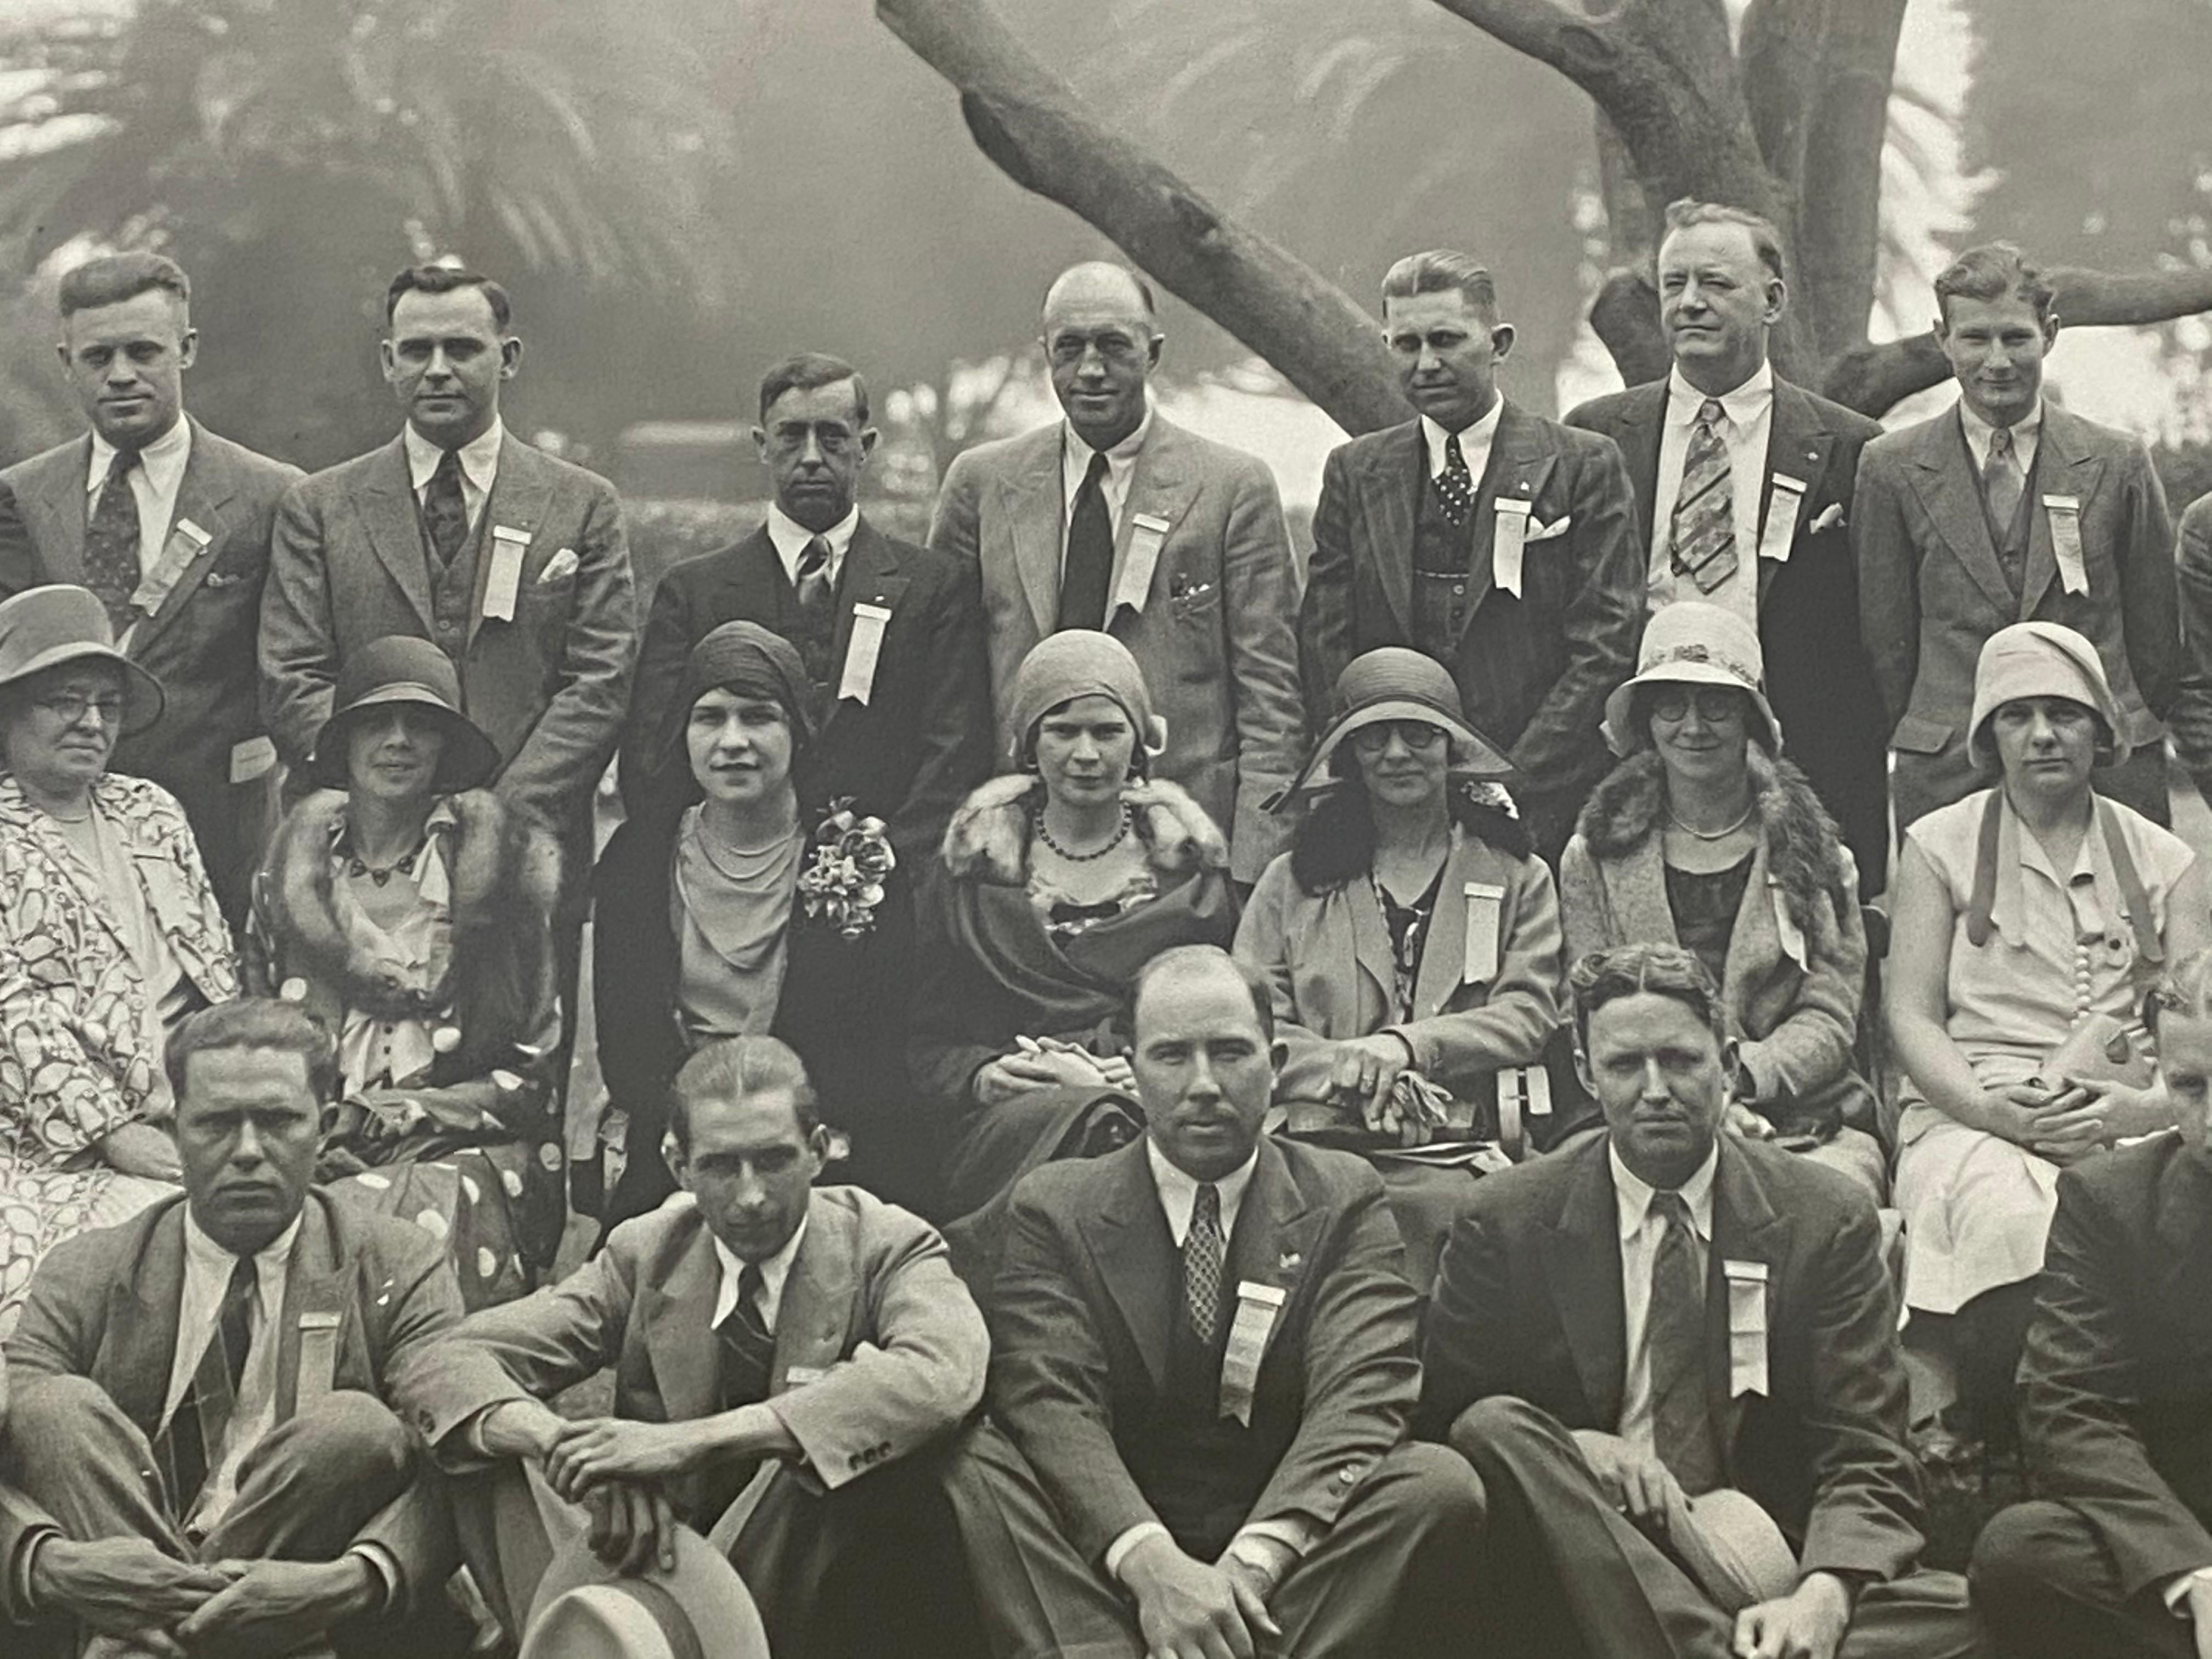 Vintage CA State Division International Association for ID Photograph circa 1930 For Sale 1